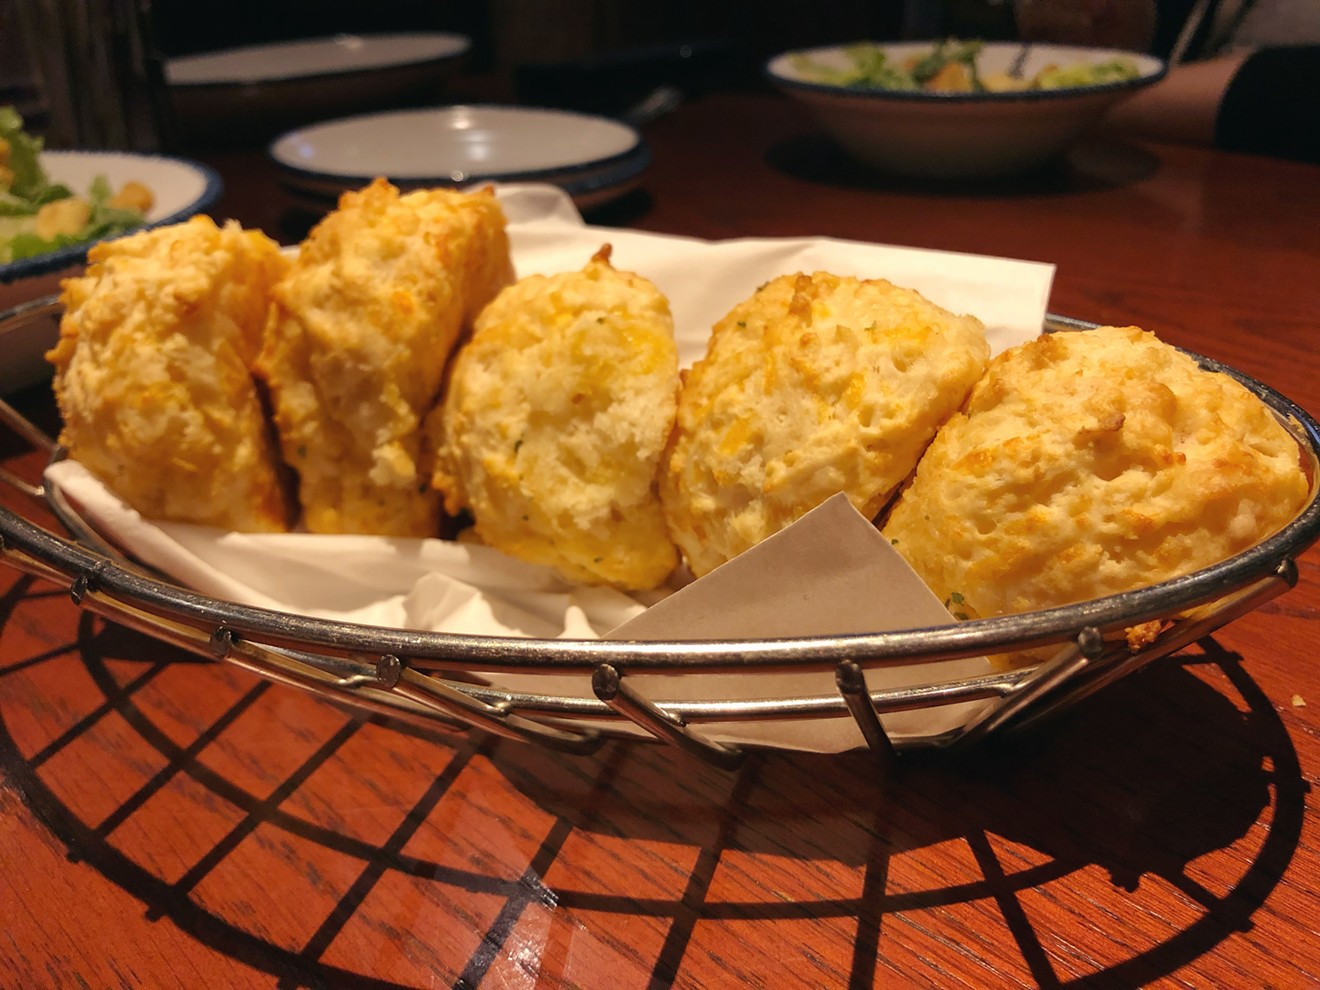 Endless Cheddar Bay Biscuits accompany every meal and inspire a near-fanatical following.